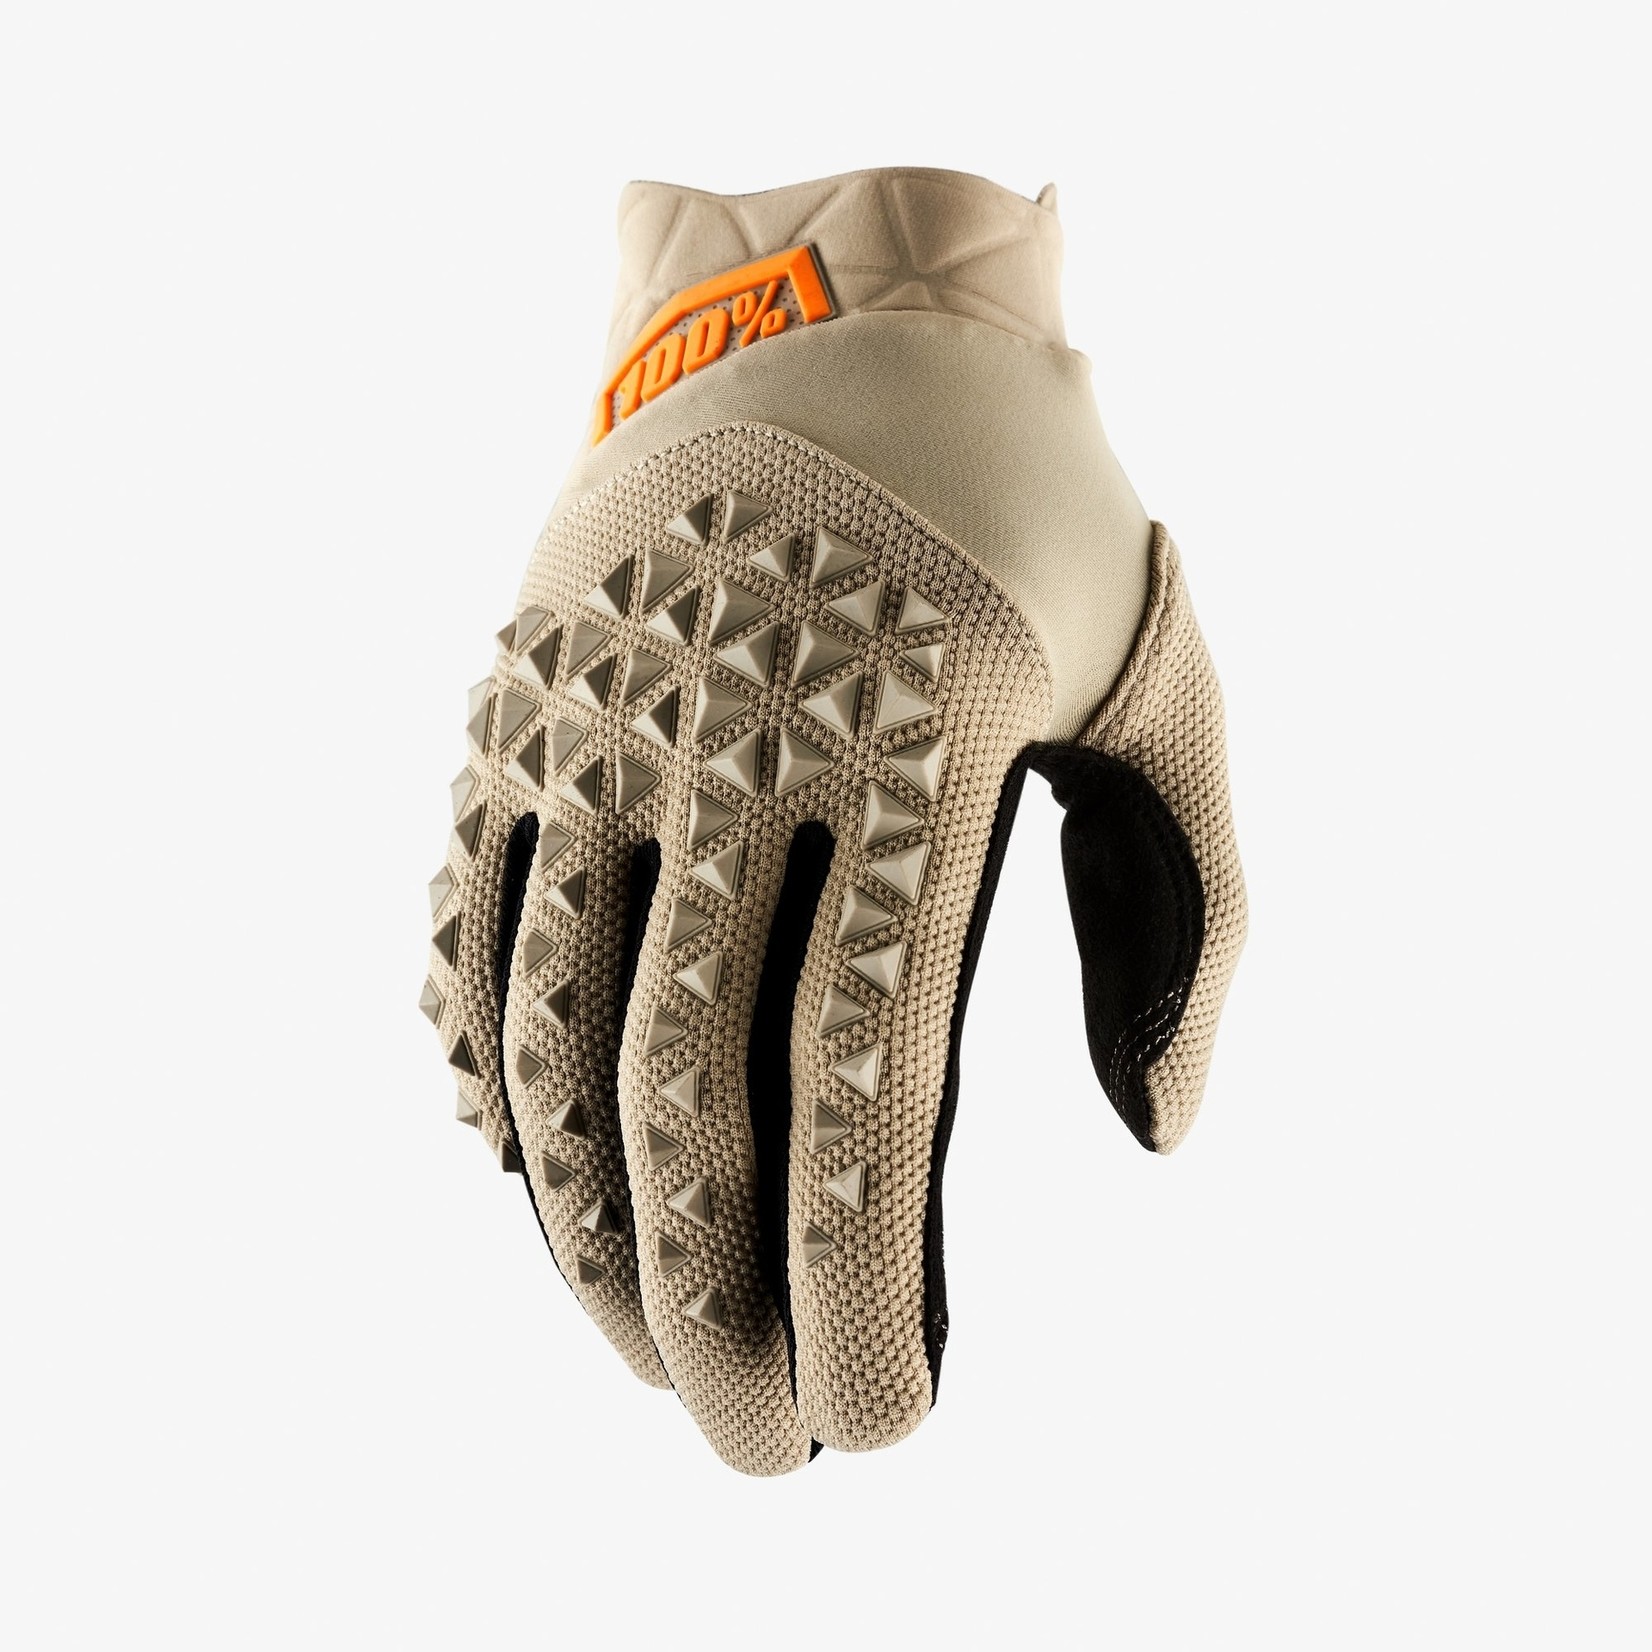 FE sports 100% Airmatic Cycling Gloves Sand